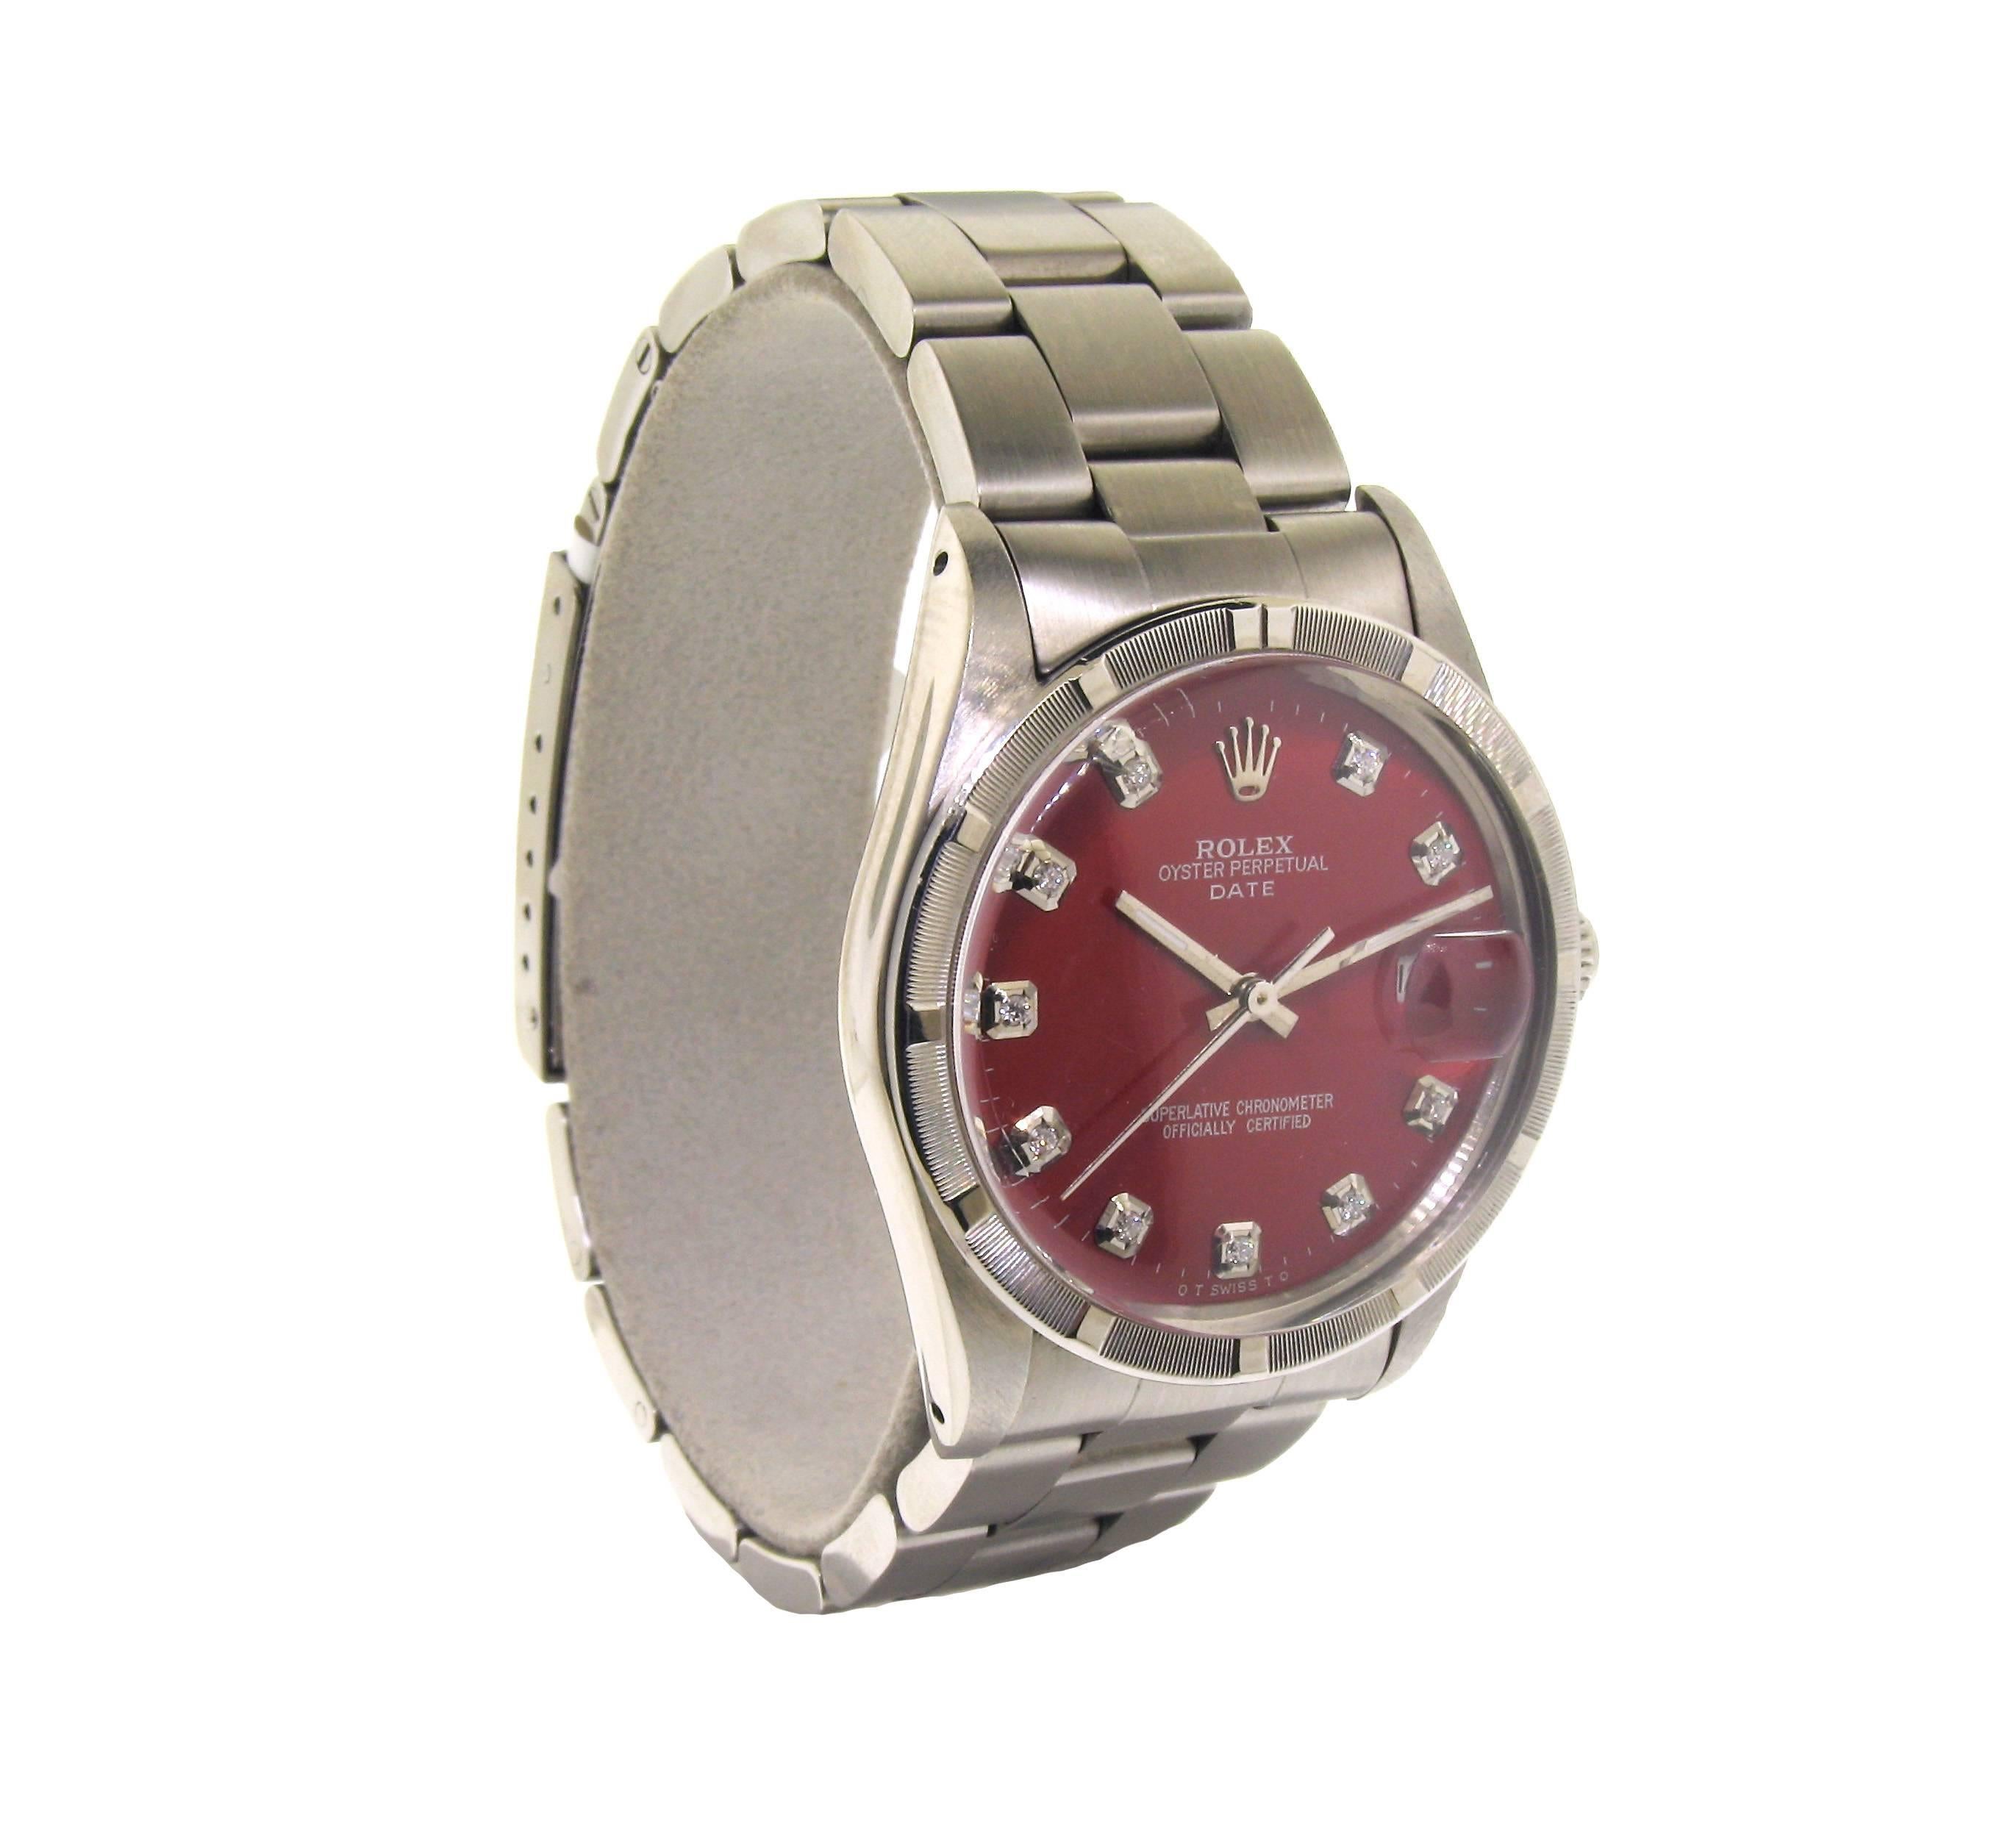 FACTORY / HOUSE: Rolex Watch Company
STYLE / REFERENCE: Oyster Perpetual / 5500
METAL: Stainless Steel 
CIRCA: 1981
MOVEMENT / CALIBER: Perpetual Winding / 27 Jewels 
DIAL / HANDS: Custom Red Dial with Diamonds / Baton Hands
DIMENSIONS:  38mm X 